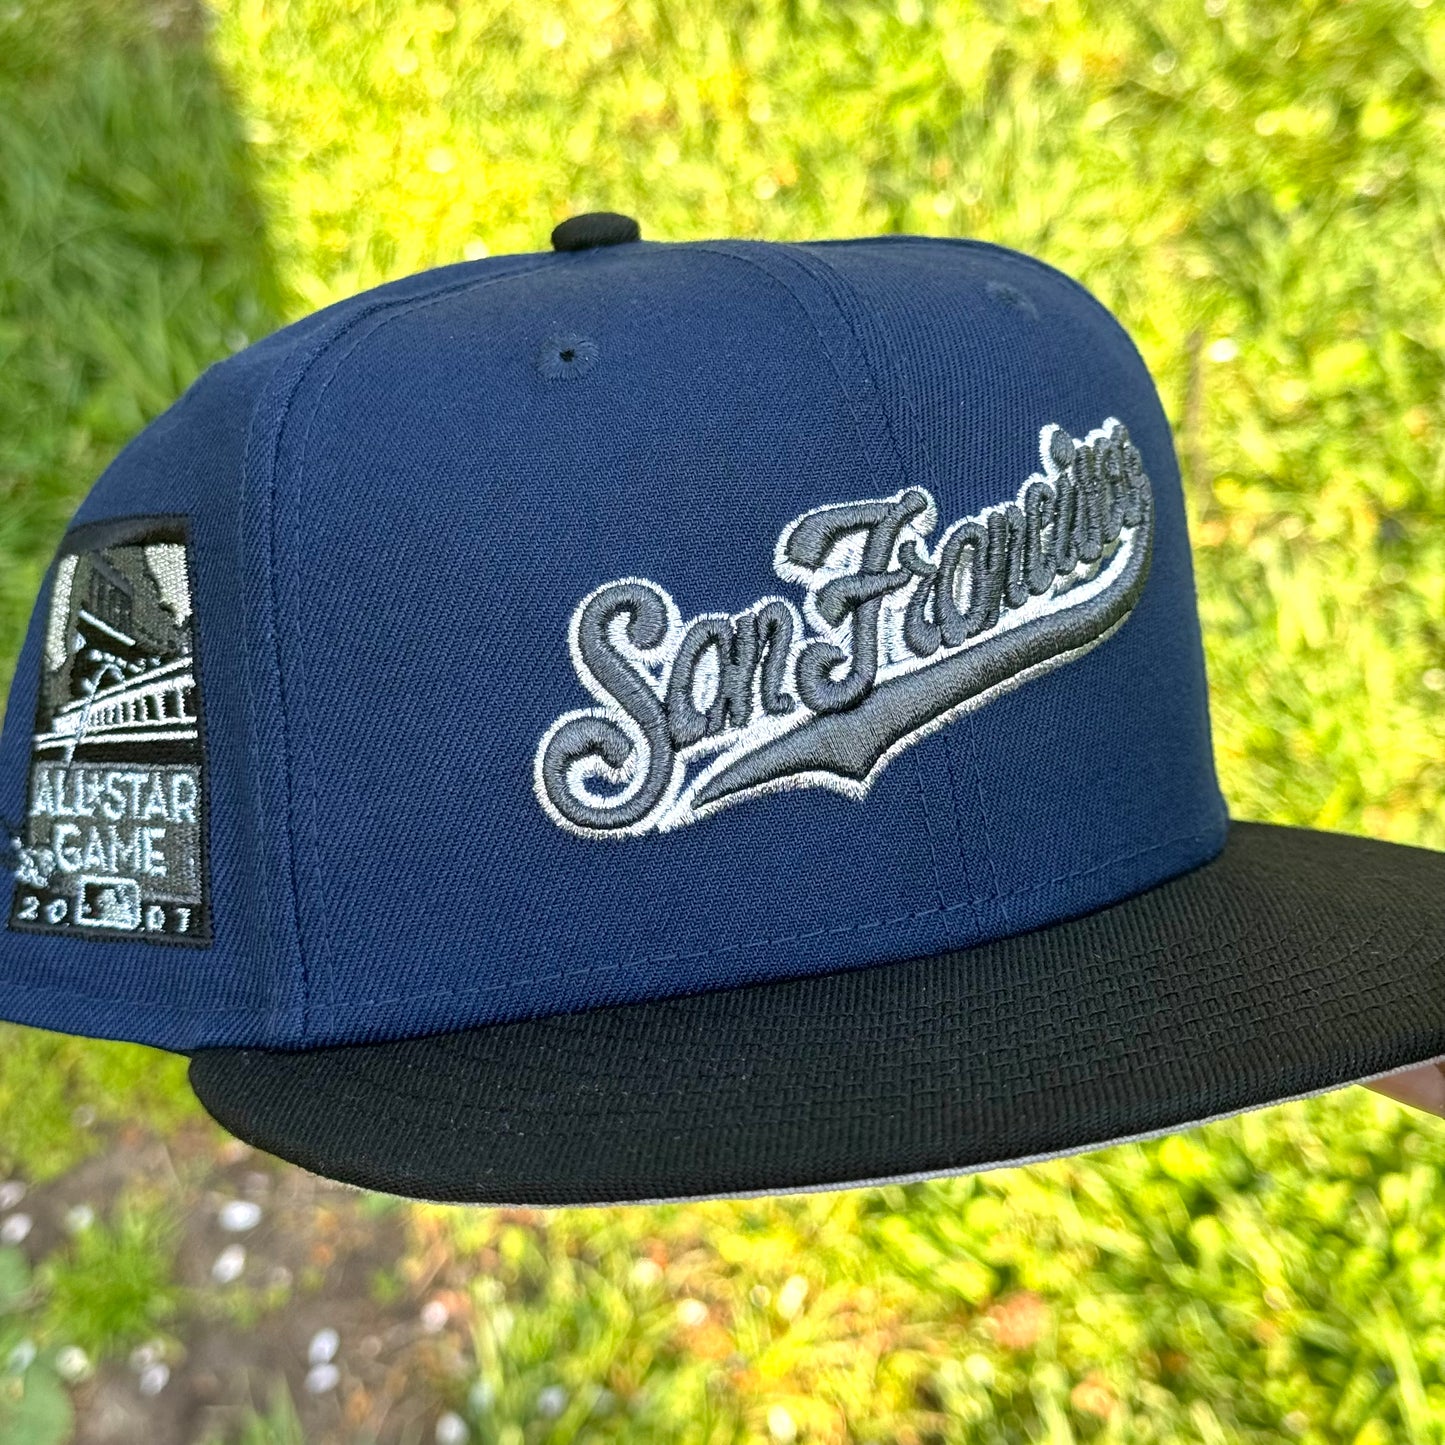 San Francisco Giants 2007 All Star Game Side Patch Fitted Hat New Era 5950 (Navy Blue/Black/Silver/Metallic Pewter)